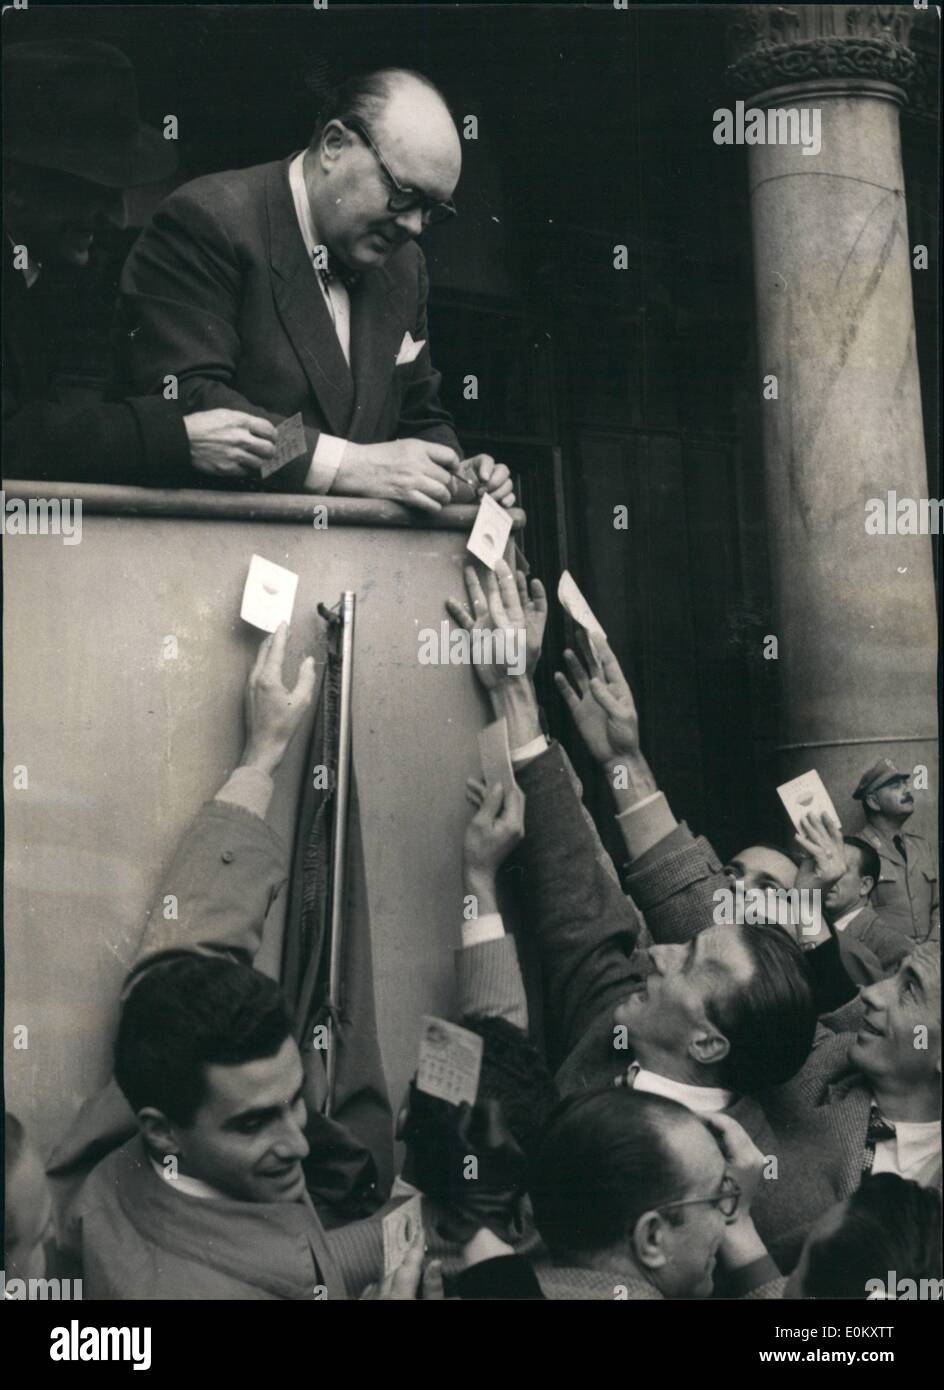 Oct. 10, 1952 - International Congress of Socialism. Several European Socialists leaders spoke in Duomo Square during a meeting Stock Photo